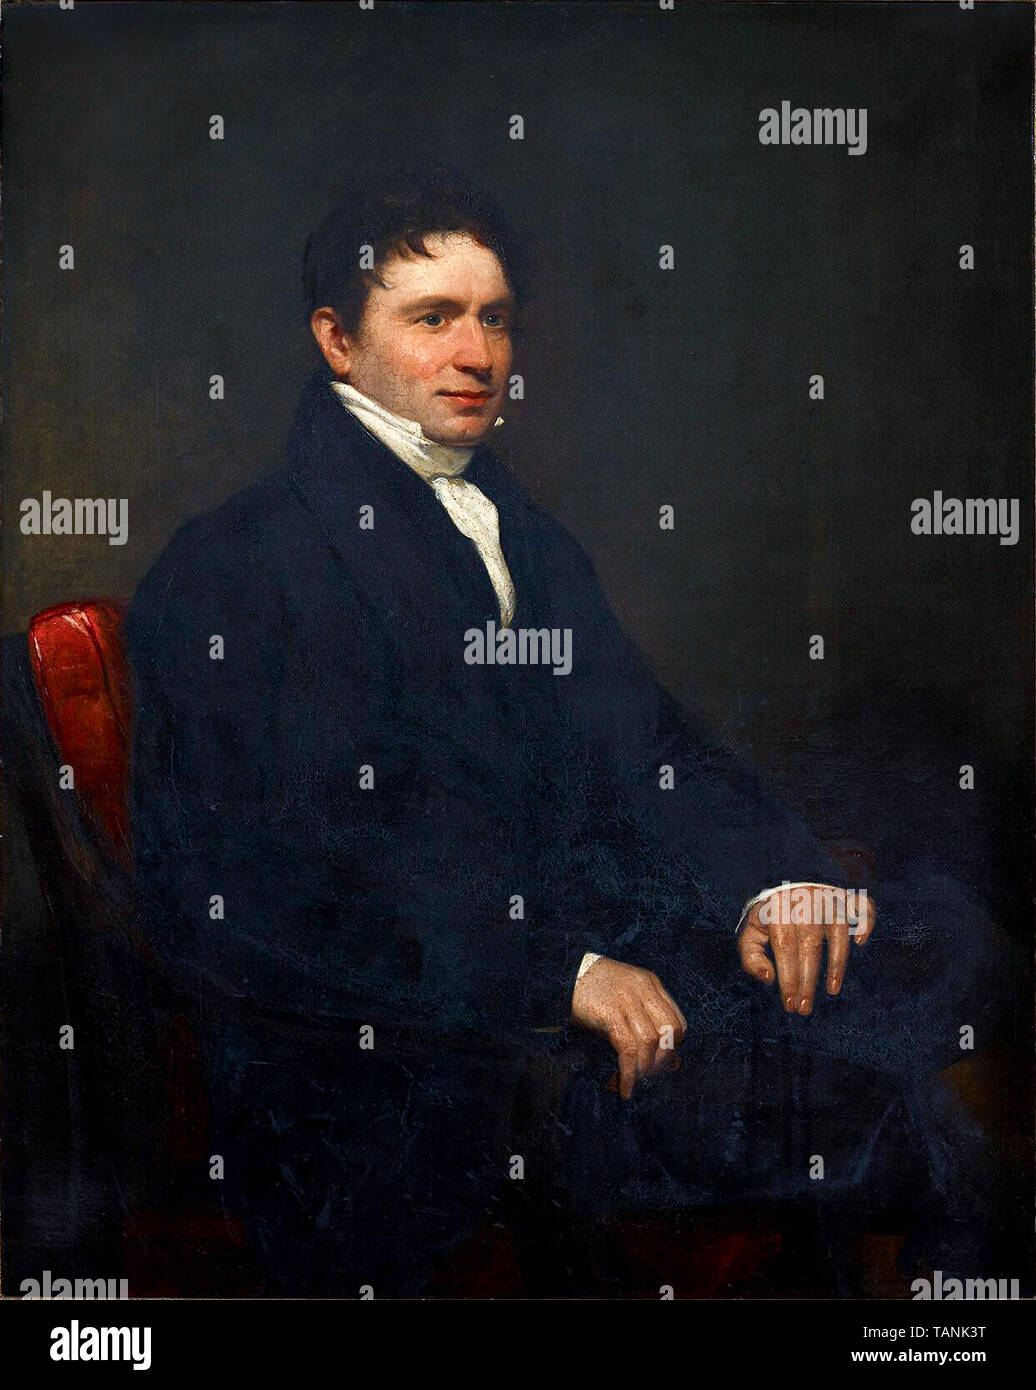 Hugh Hornby Birley, who gave the order for the Manchester and Salford Yeomanry to charge leading to the Peterloo Massacre of 16 August 1819, portrait painting, before 1845 Stock Photo